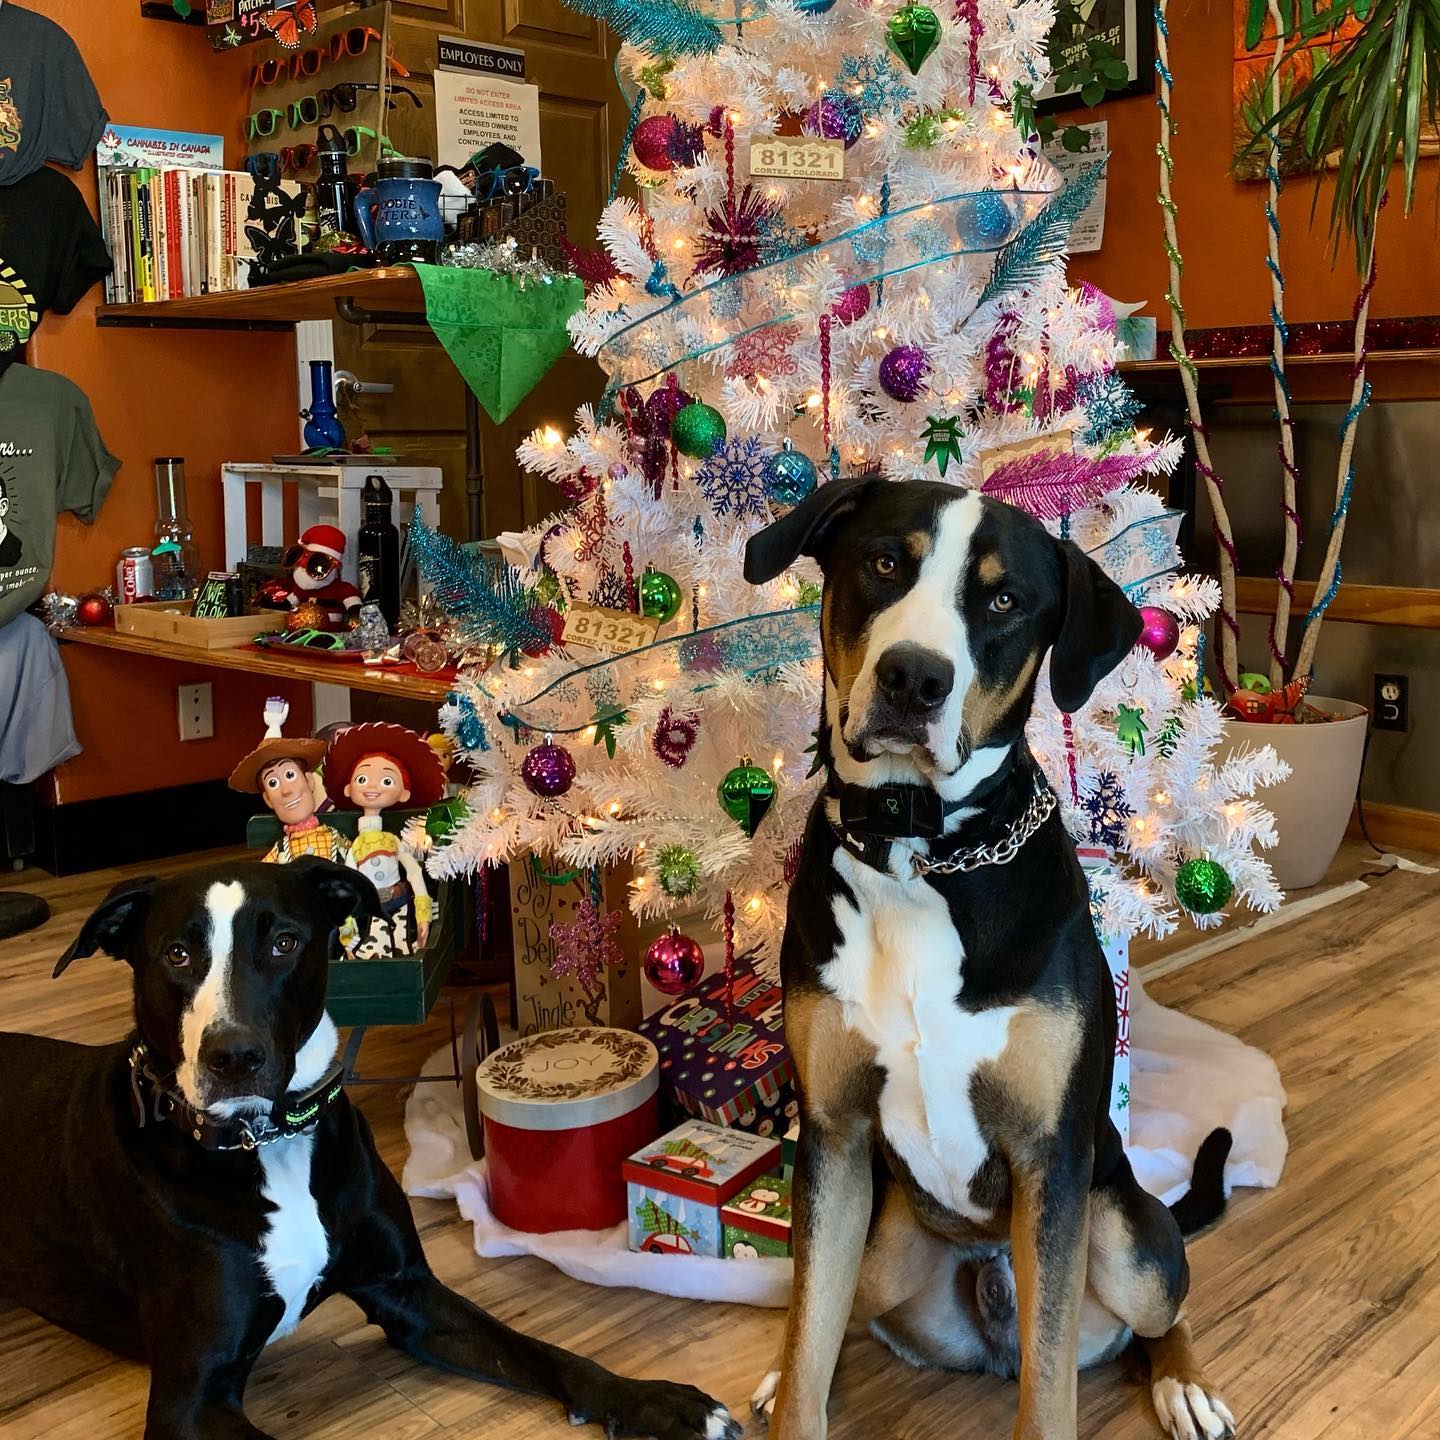 The best way to spread holiday cheer is shopping local and #puppypics #cortezcolorado #shoplocal #getdoobifiedresponsibly